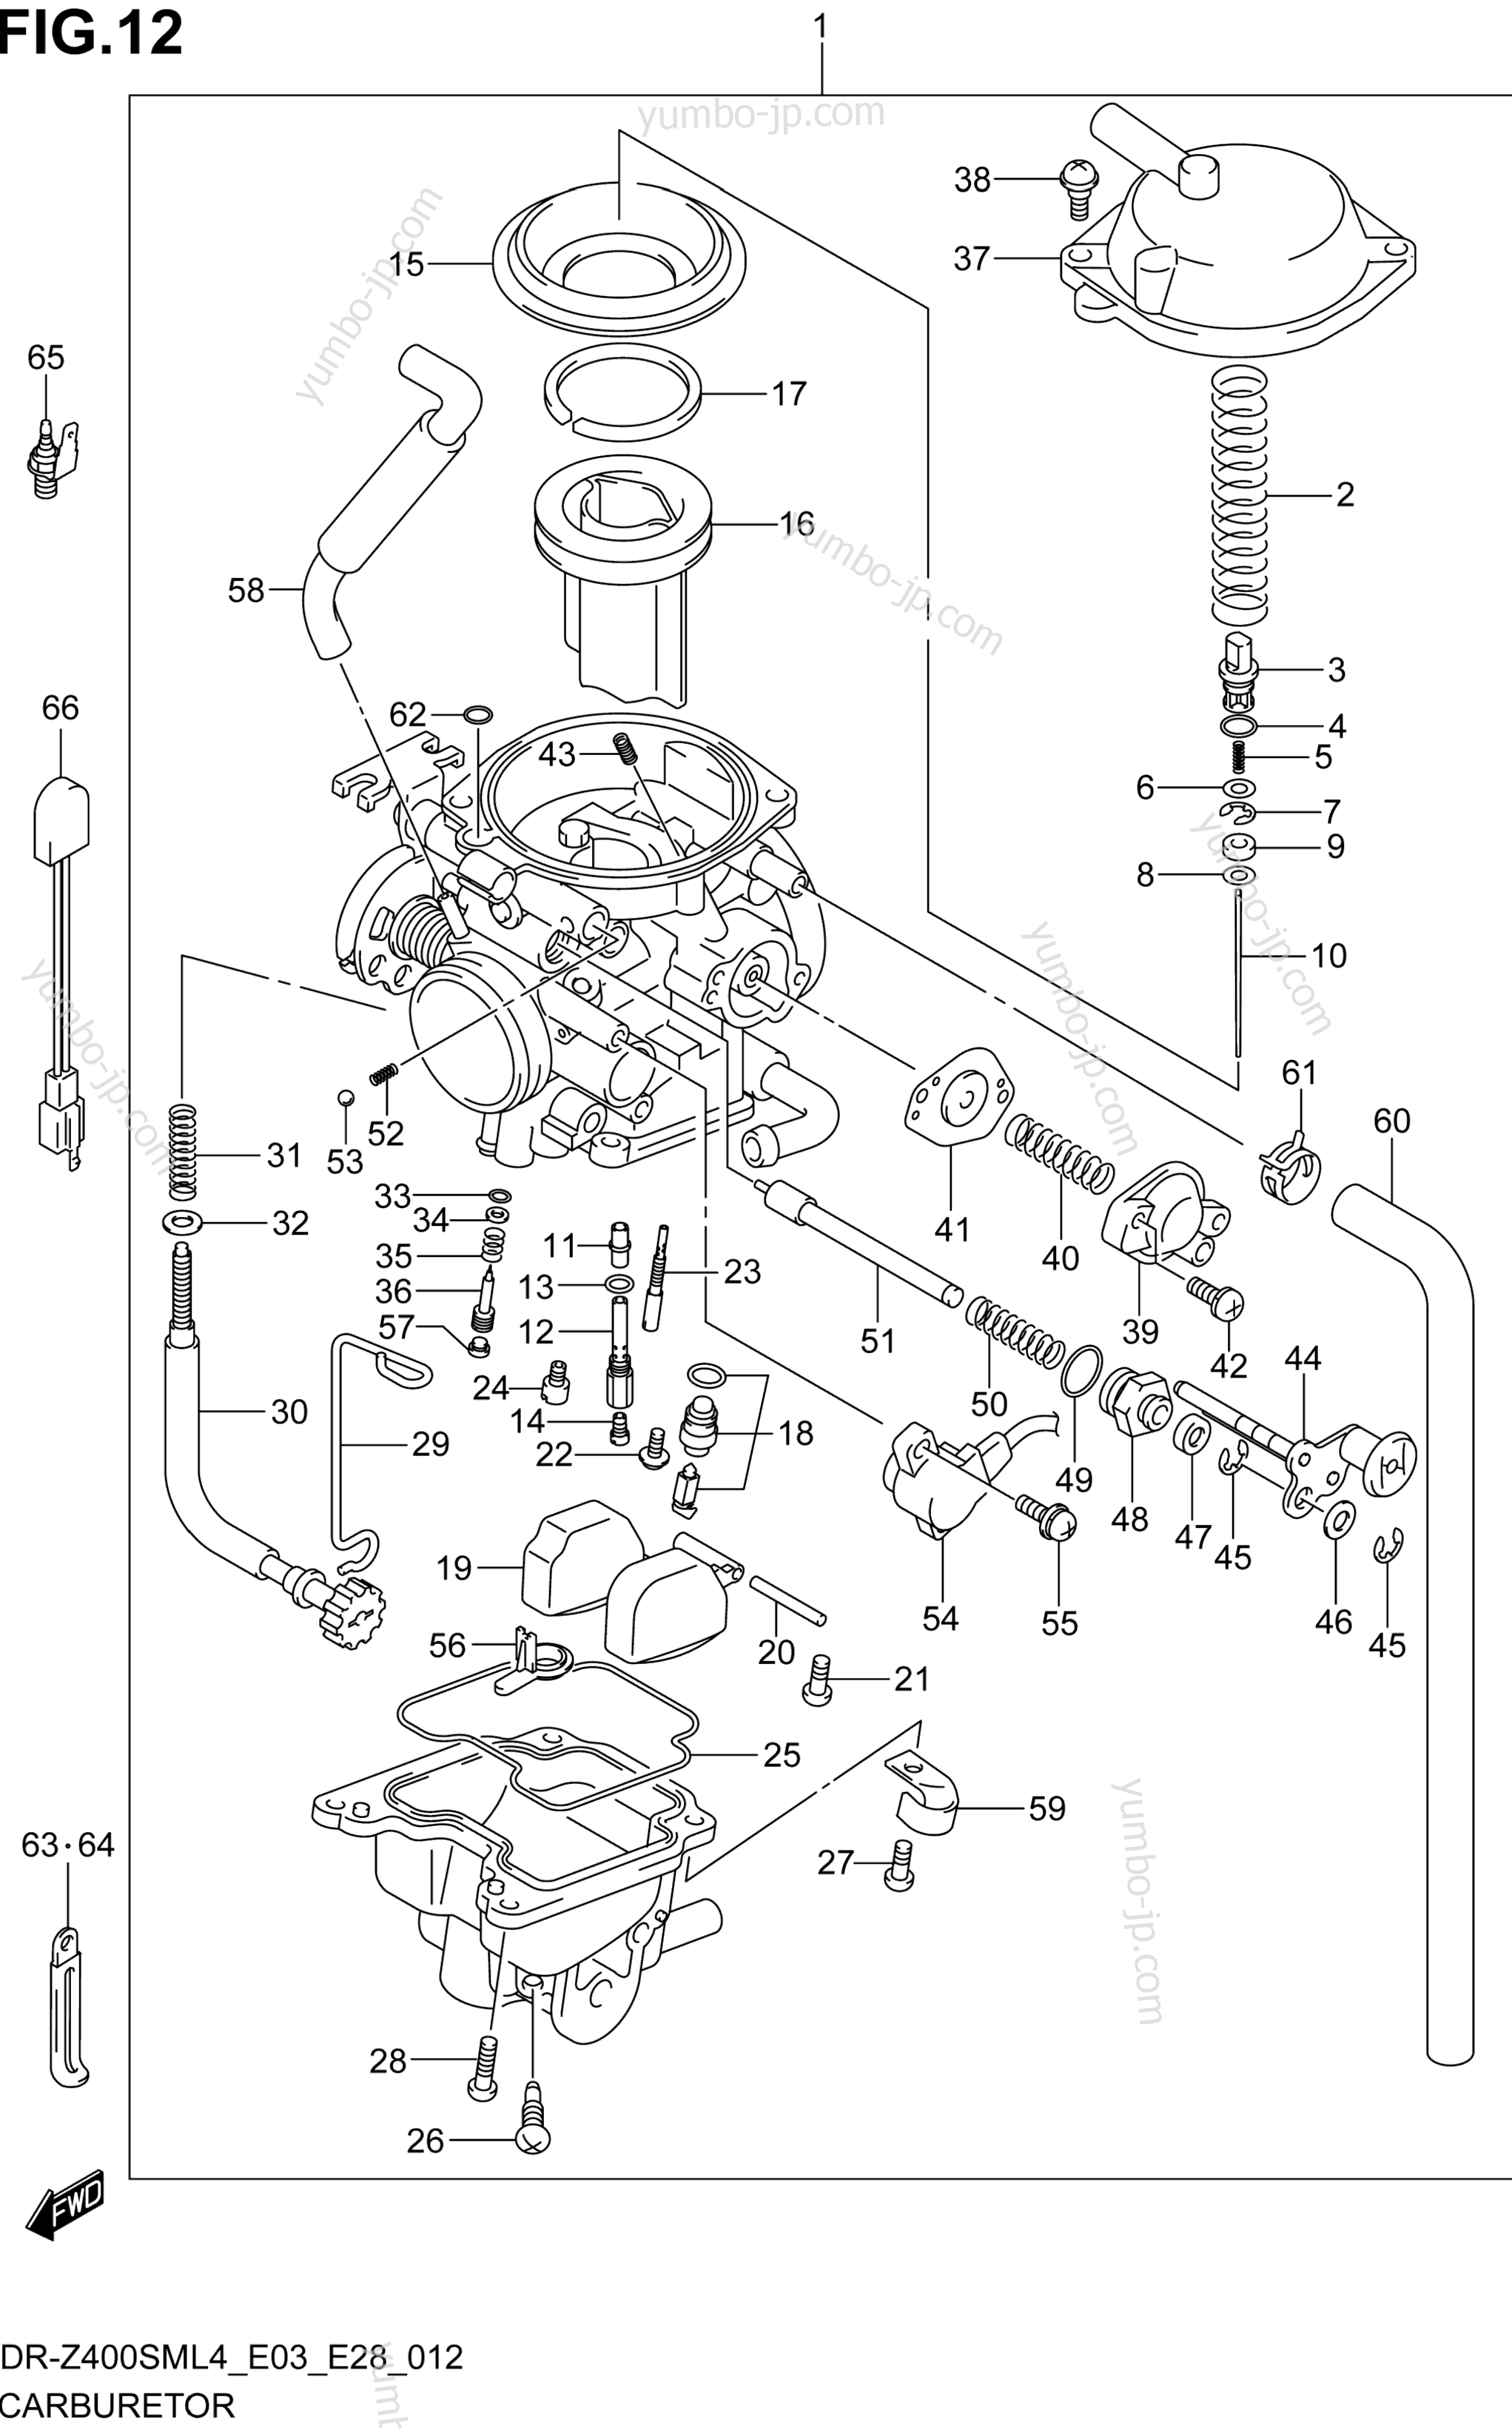 CARBURETOR (DR-Z400SML4 E03) for motorcycles SUZUKI DR-Z400SM 2014 year